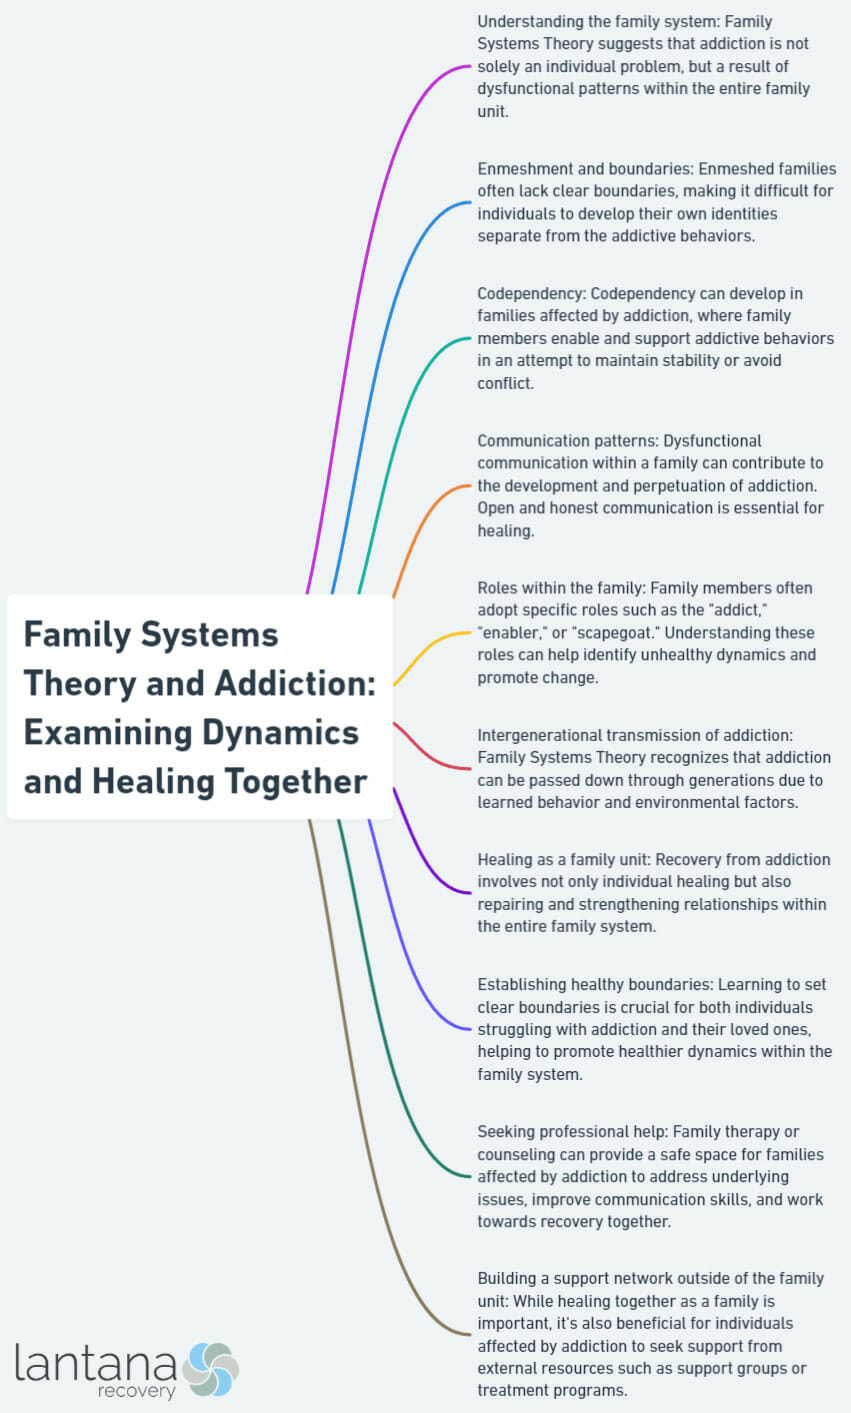 Family Systems Theory and Addiction: Examining Dynamics and Healing Together